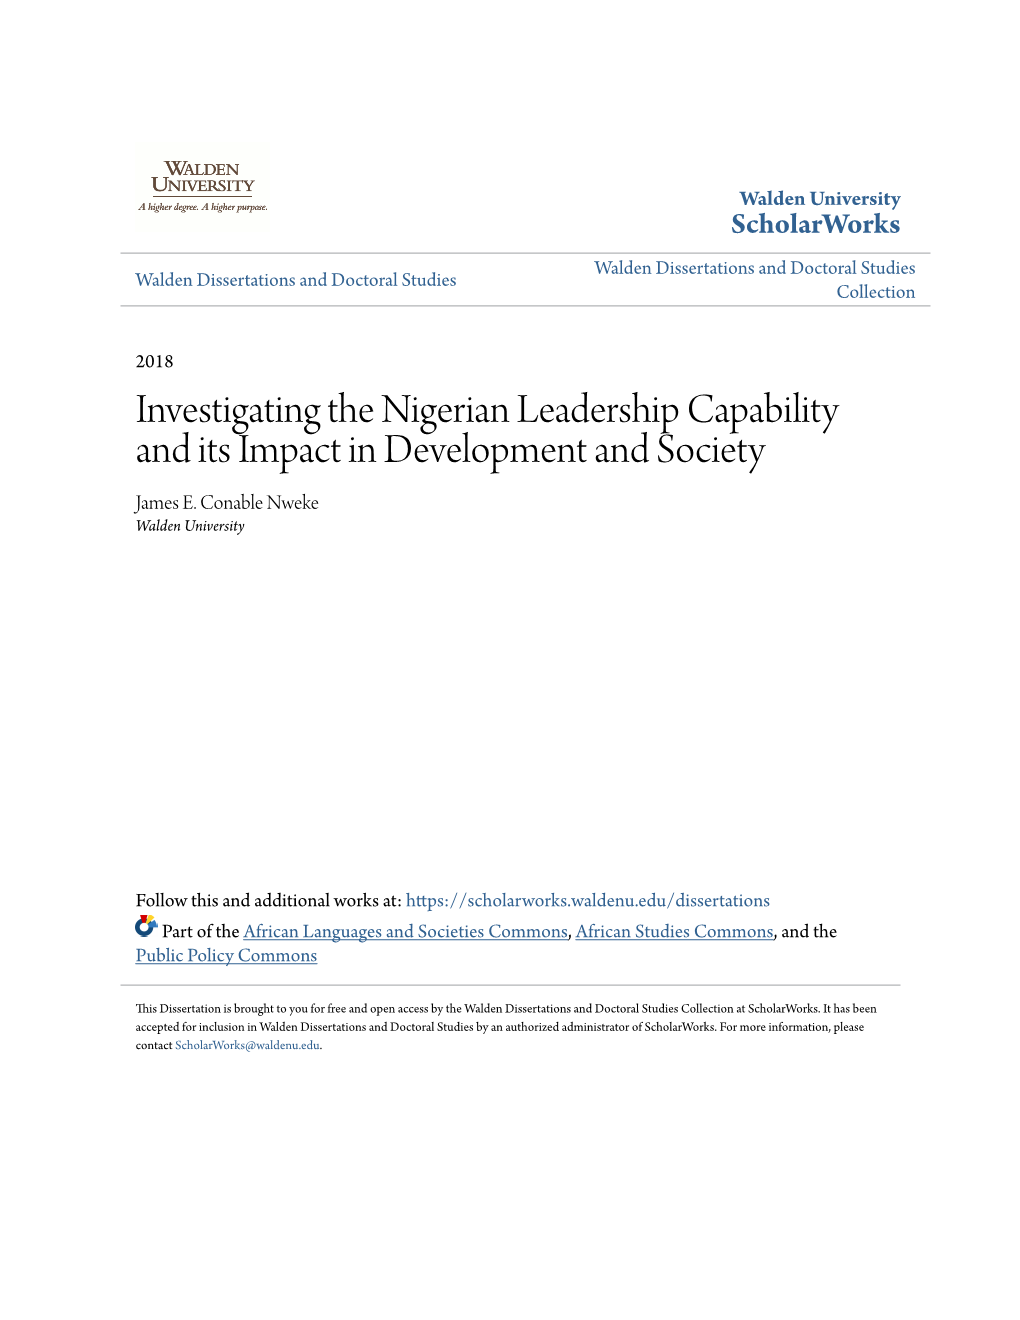 Investigating the Nigerian Leadership Capability and Its Impact in Development and Society James E